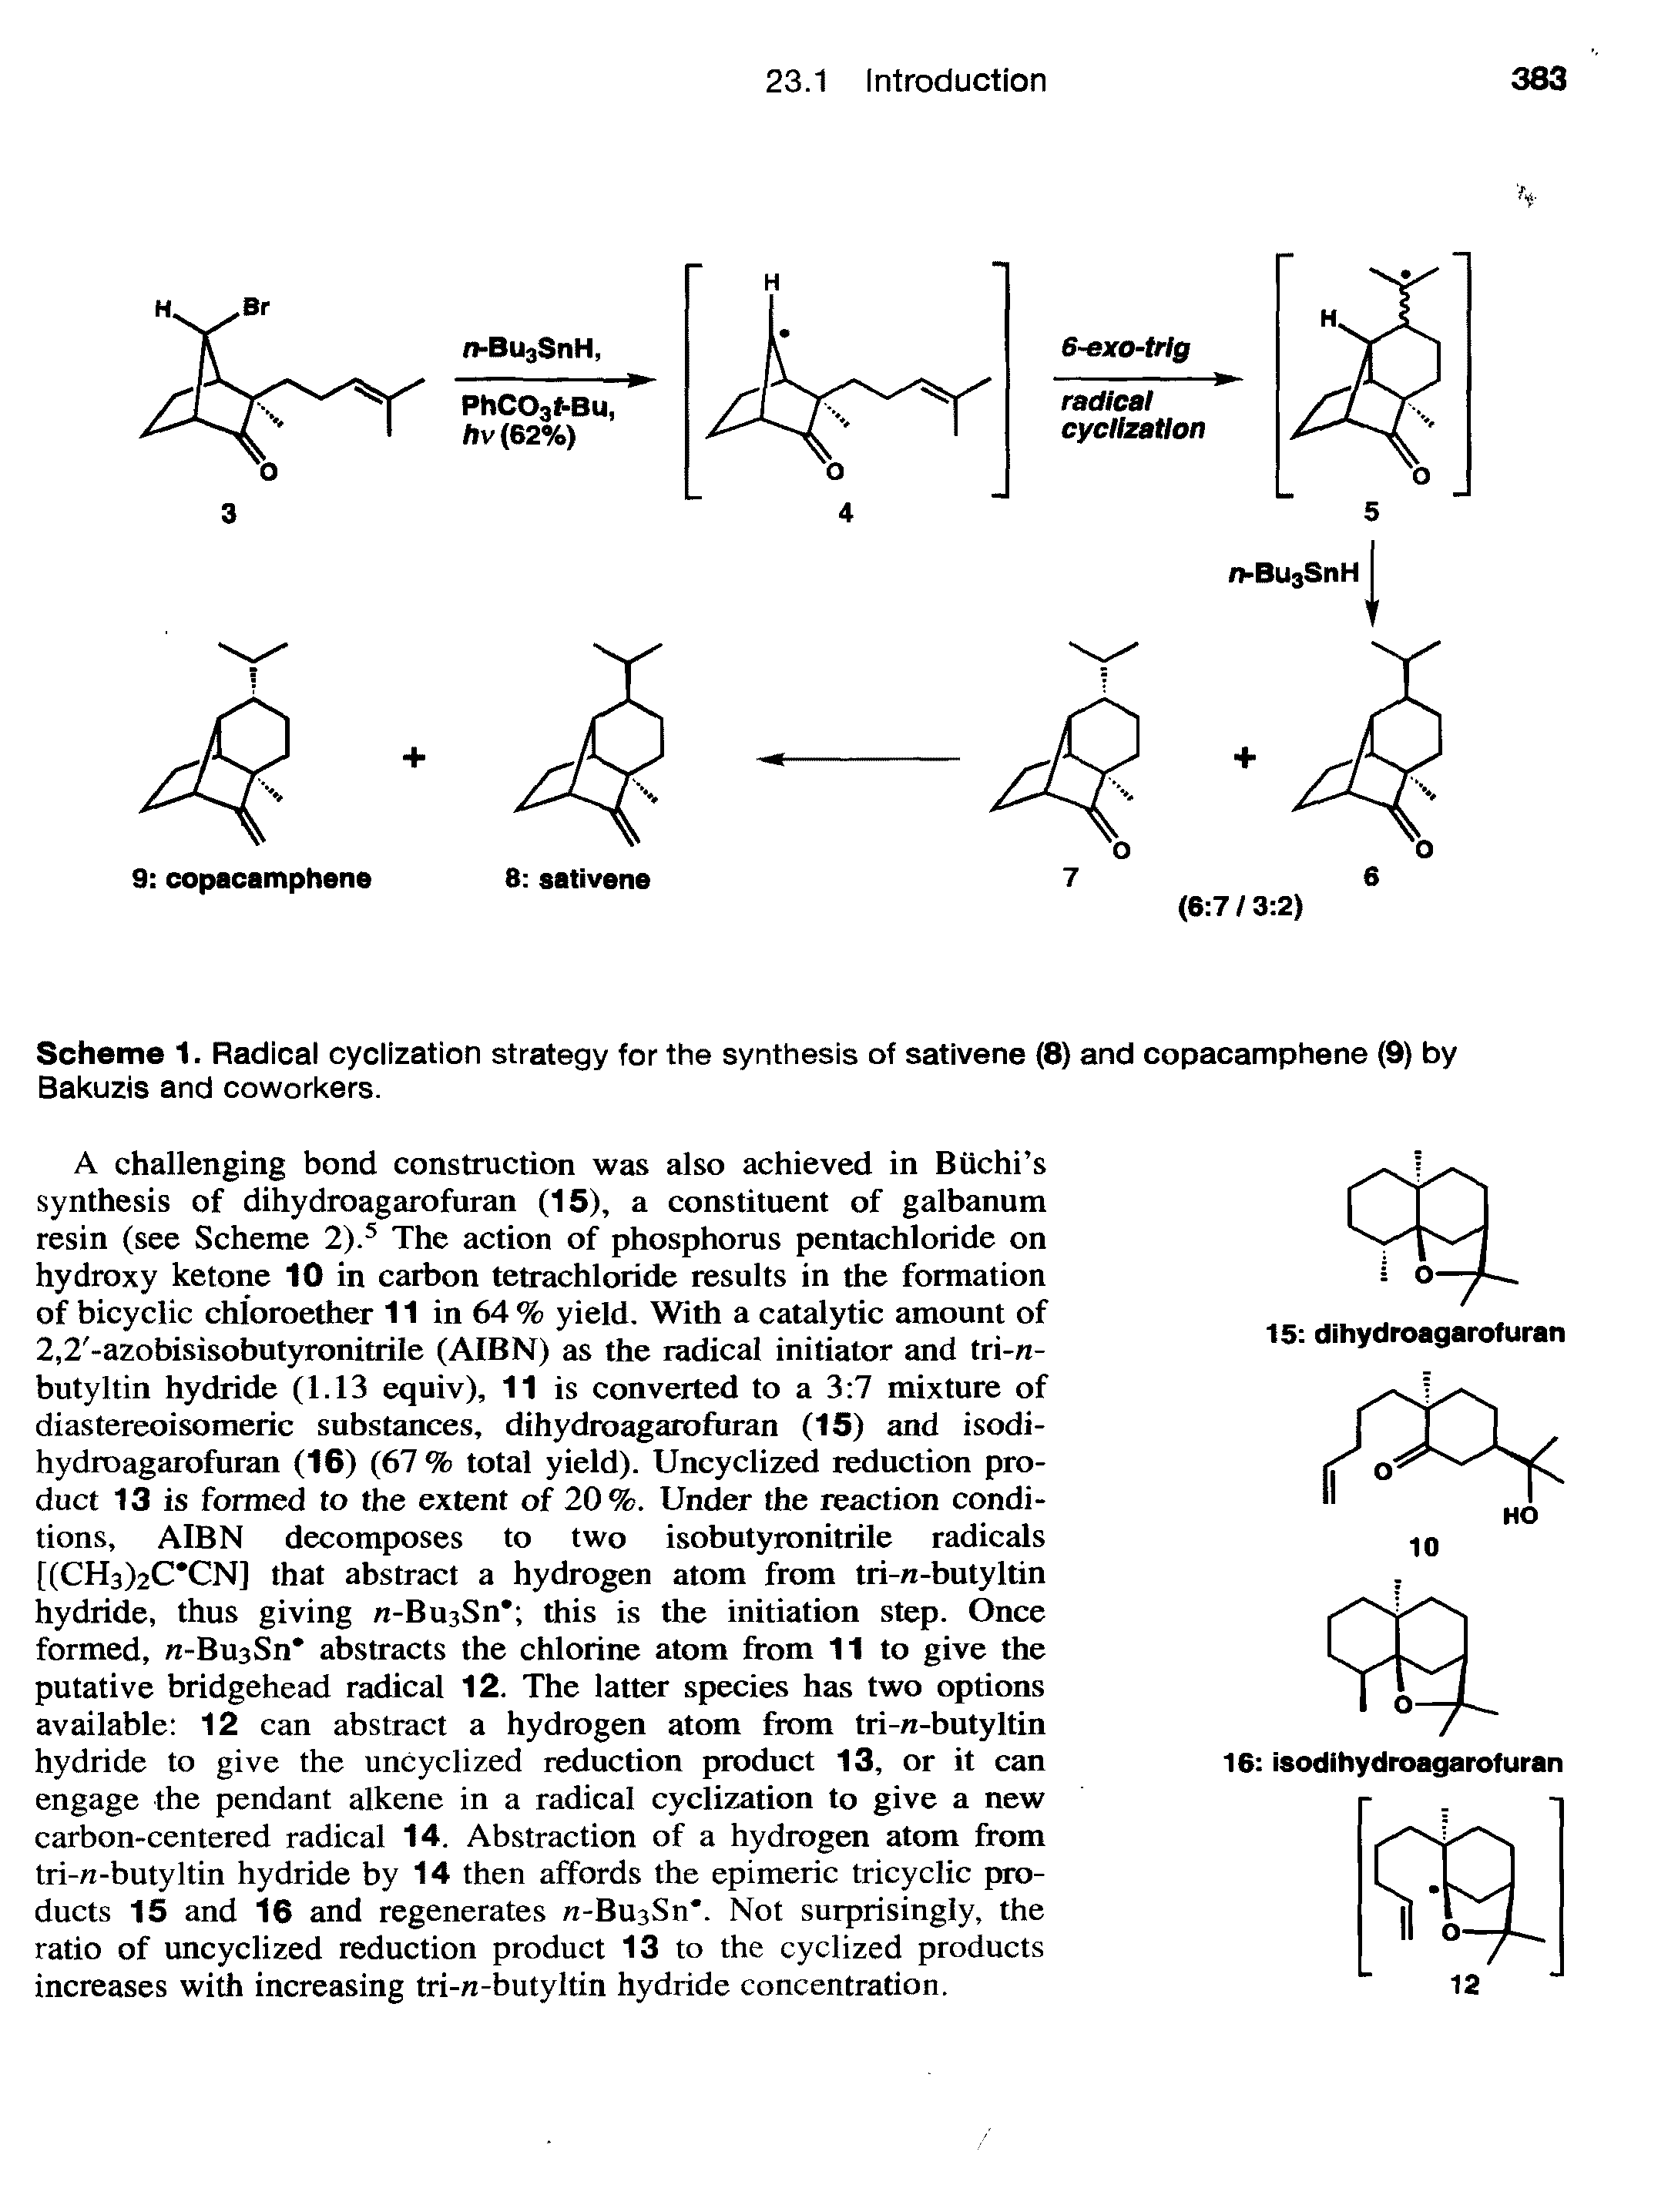 Scheme 1. Radical cyclization strategy for the synthesis of sativene (8) and copacamphene (9) by Bakuzis and coworkers.